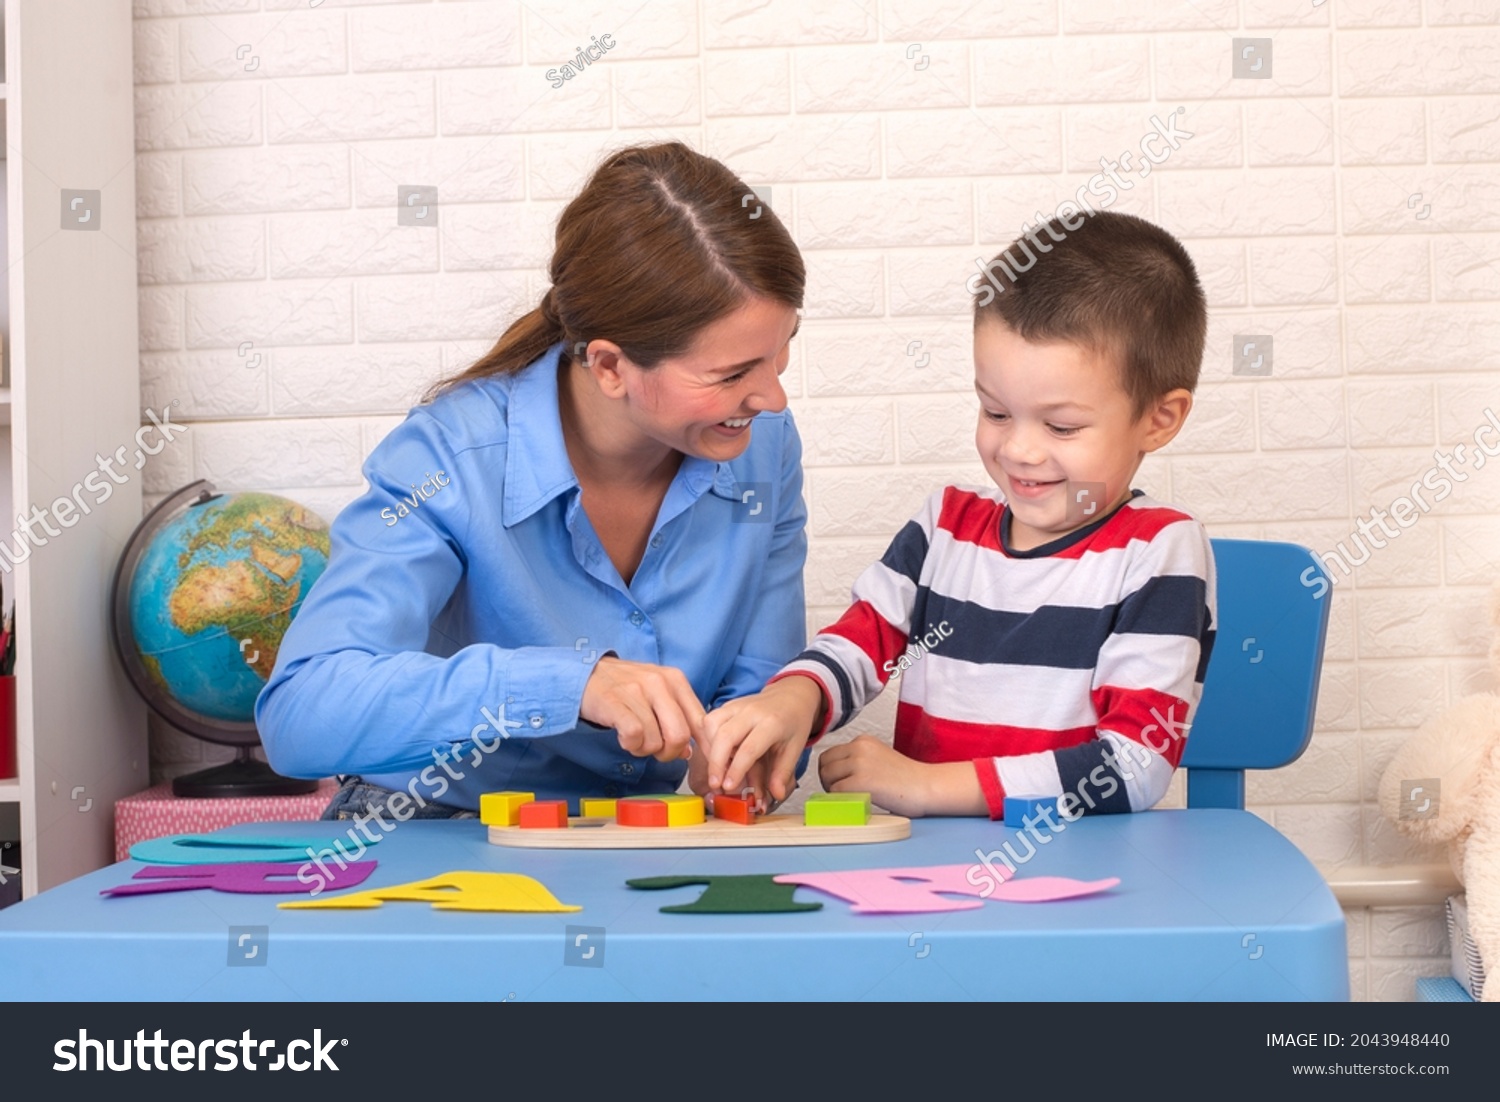 Toddler boy in child occupational therapy session doing sensory playful exercises with her therapist. #2043948440